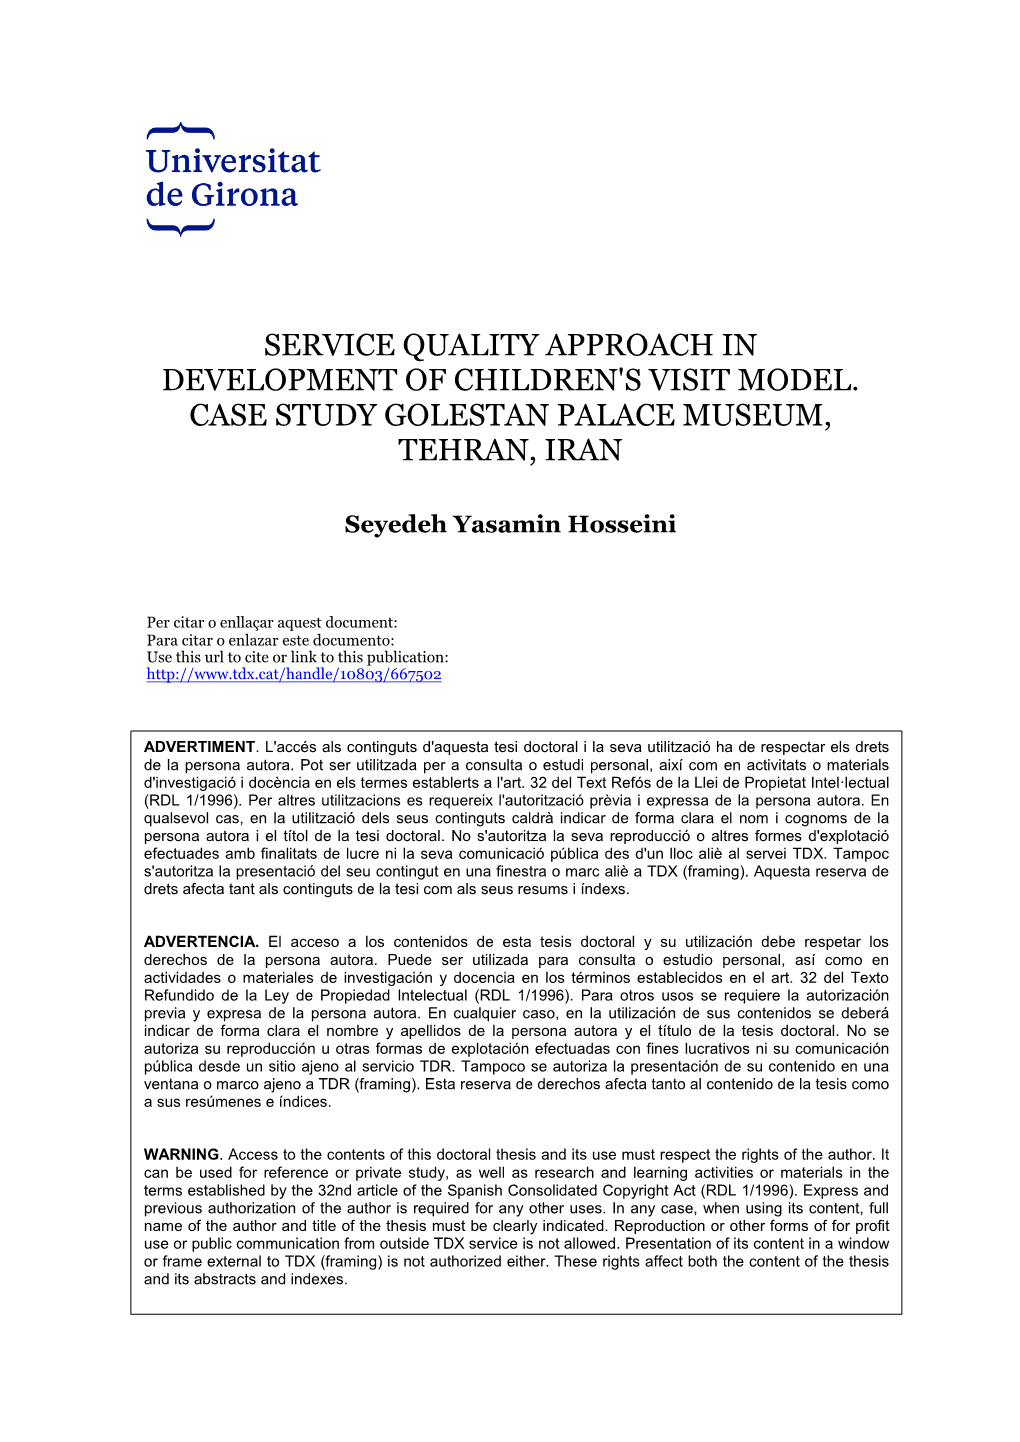 Service Quality Approach in Development of Children's Visit Model